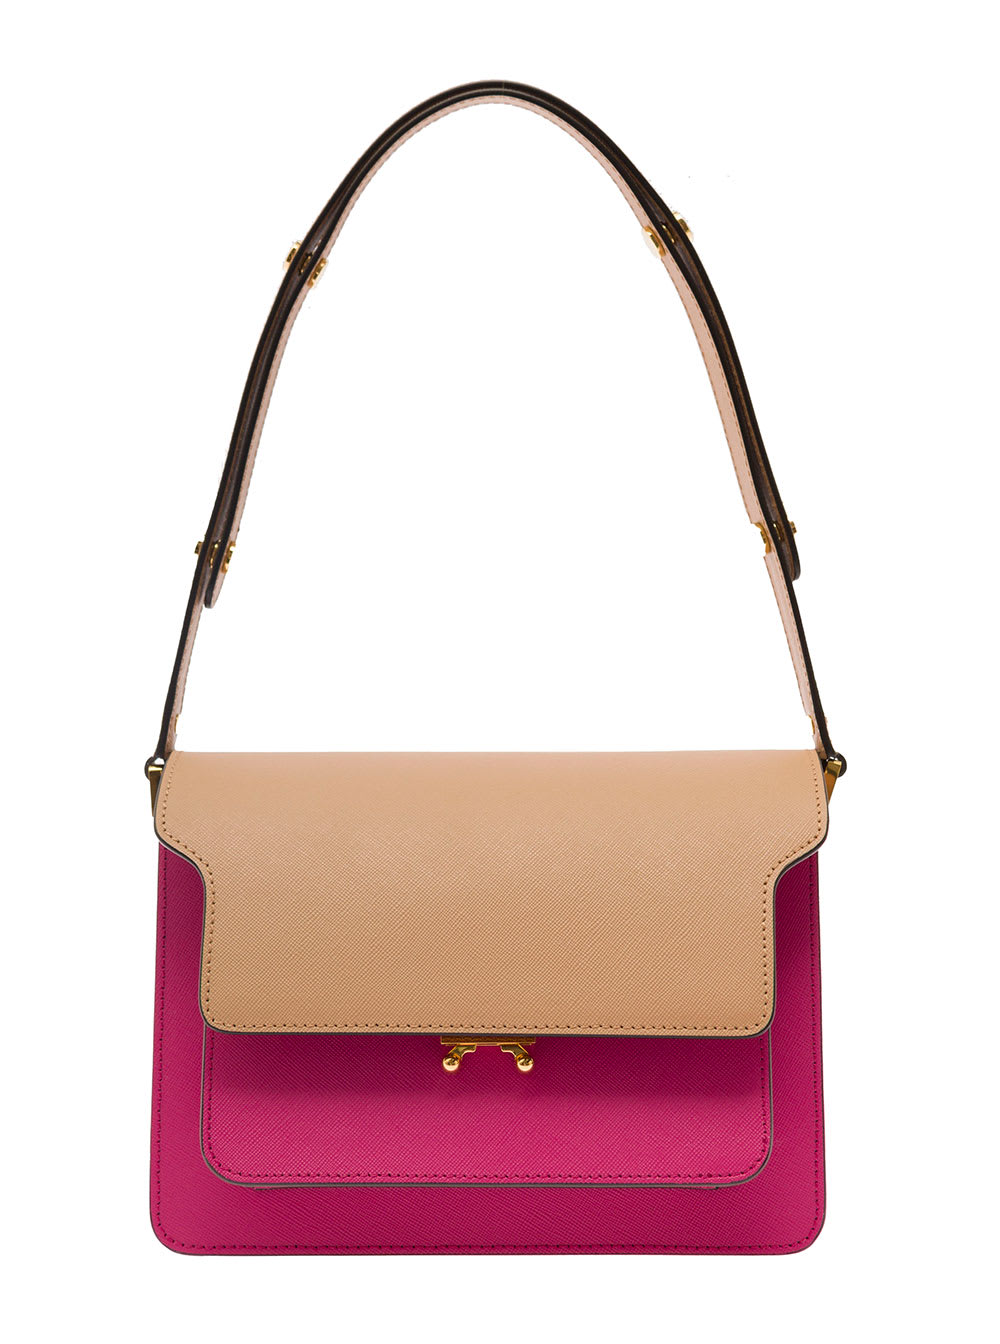 Marni Multicolour Trunk Shoulder Bag With Gold-Tone Details In Multicolour Leather Woman